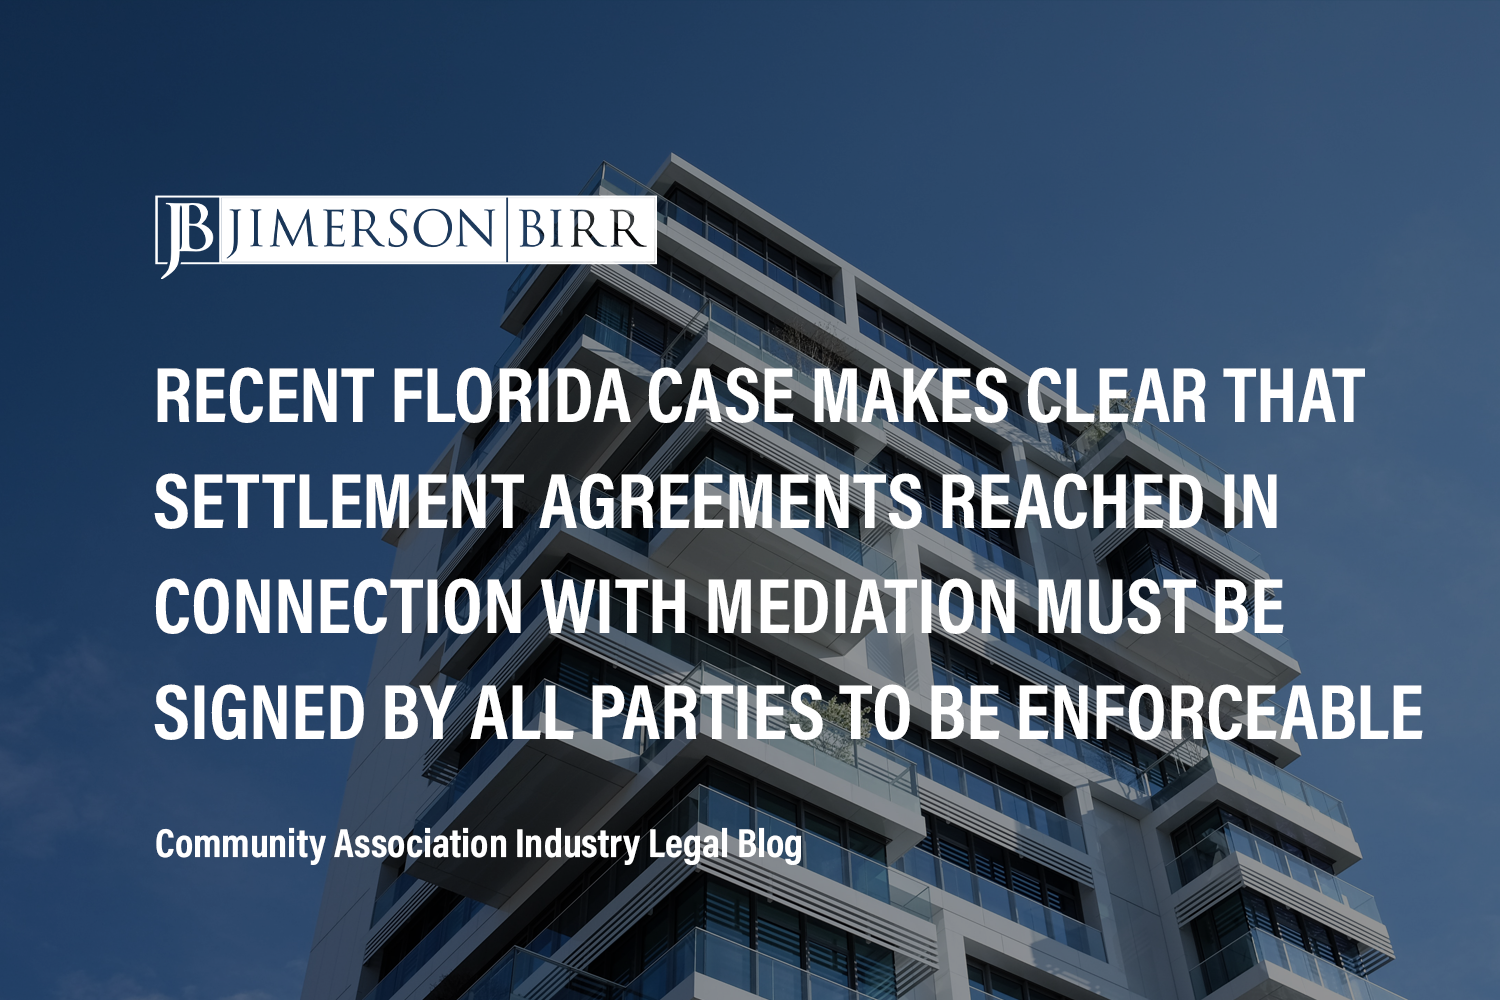 Recent Florida Case Makes Clear That Settlement Agreements Reached in Connection with Mediation Must be Signed by All Parties to be Enforceable